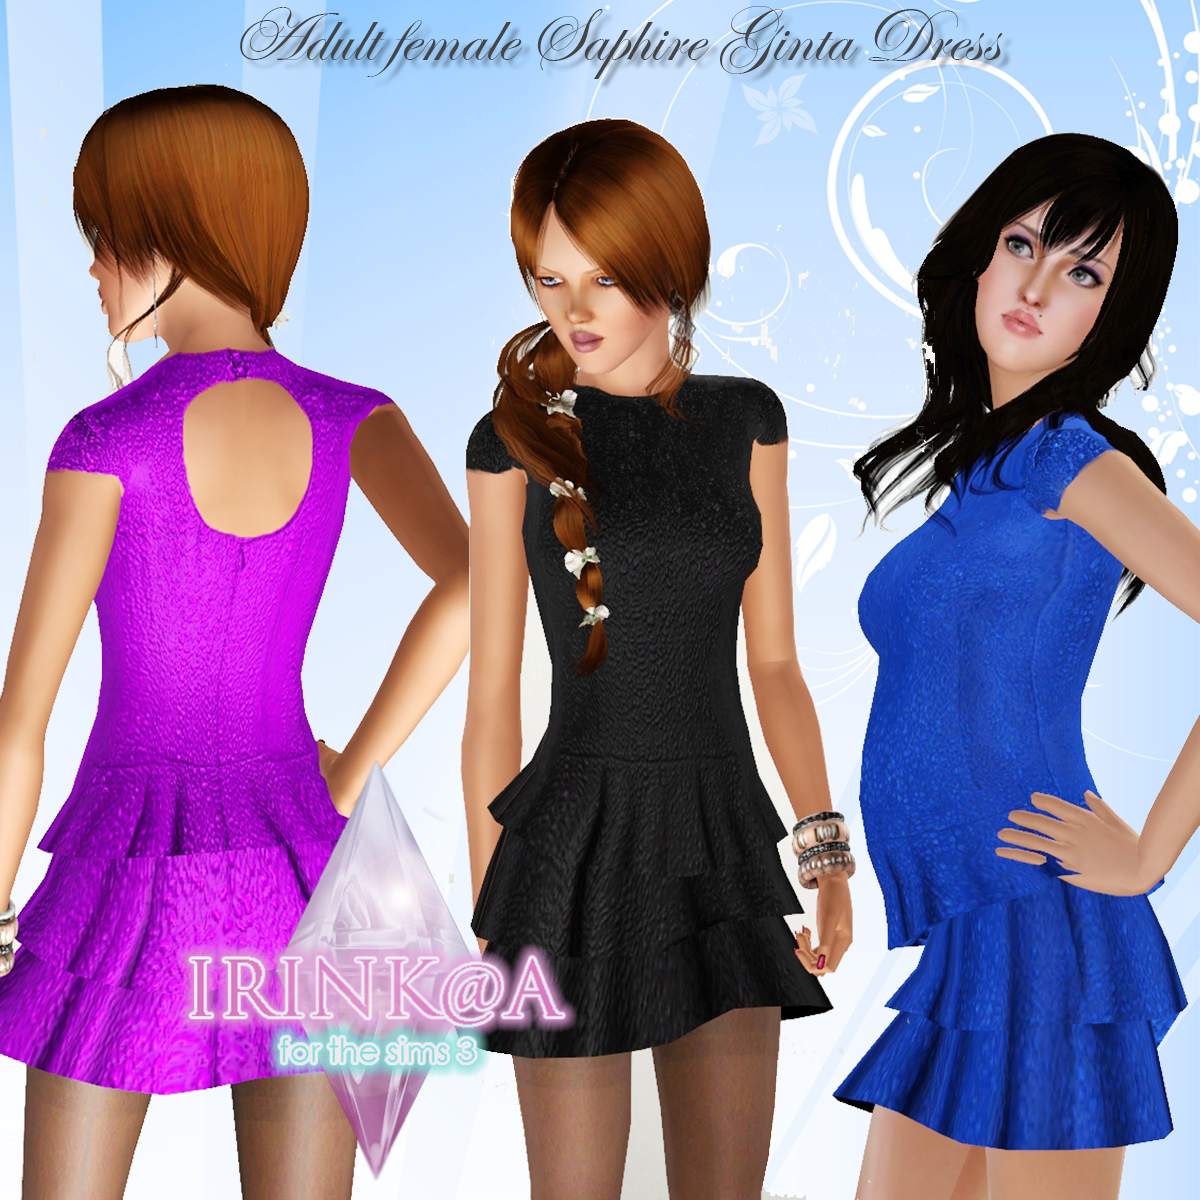 entertainment world: My Sims 3 Blog: New Clothing for Females by Irink@a